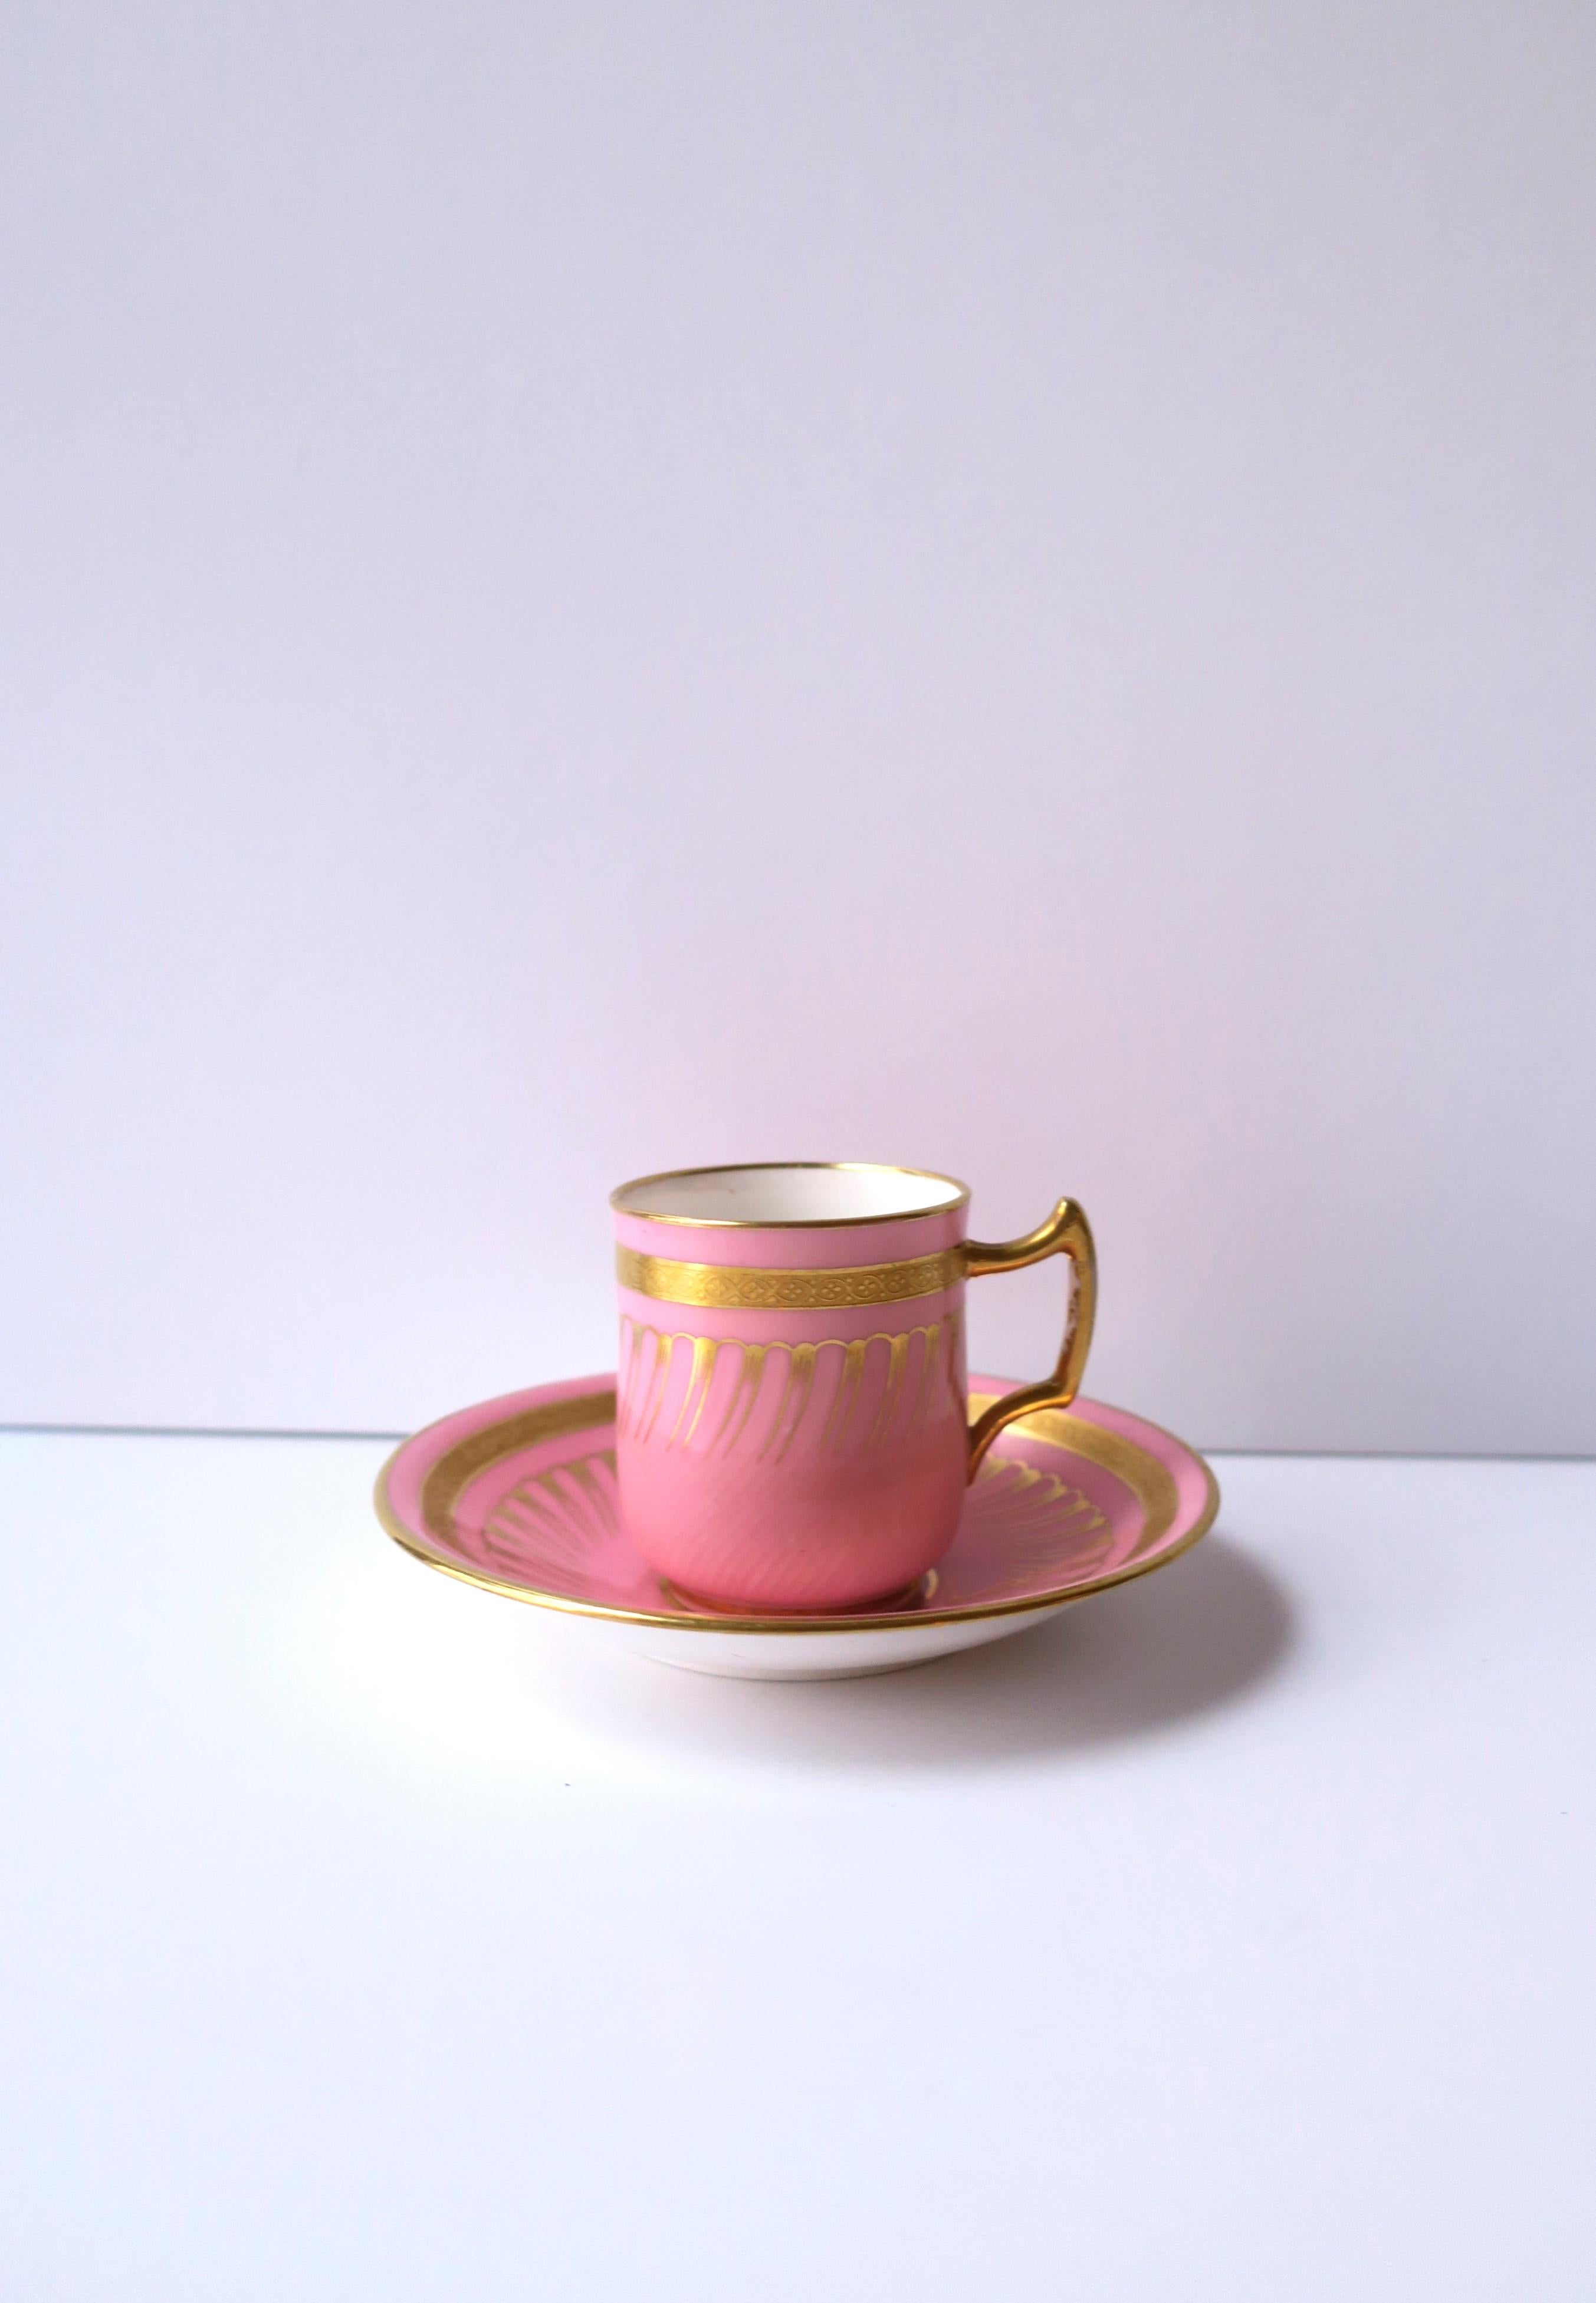 English Minton Pink & Gold Porcelain Coffee Espresso Cup & Saucer, 19th century In Good Condition For Sale In New York, NY